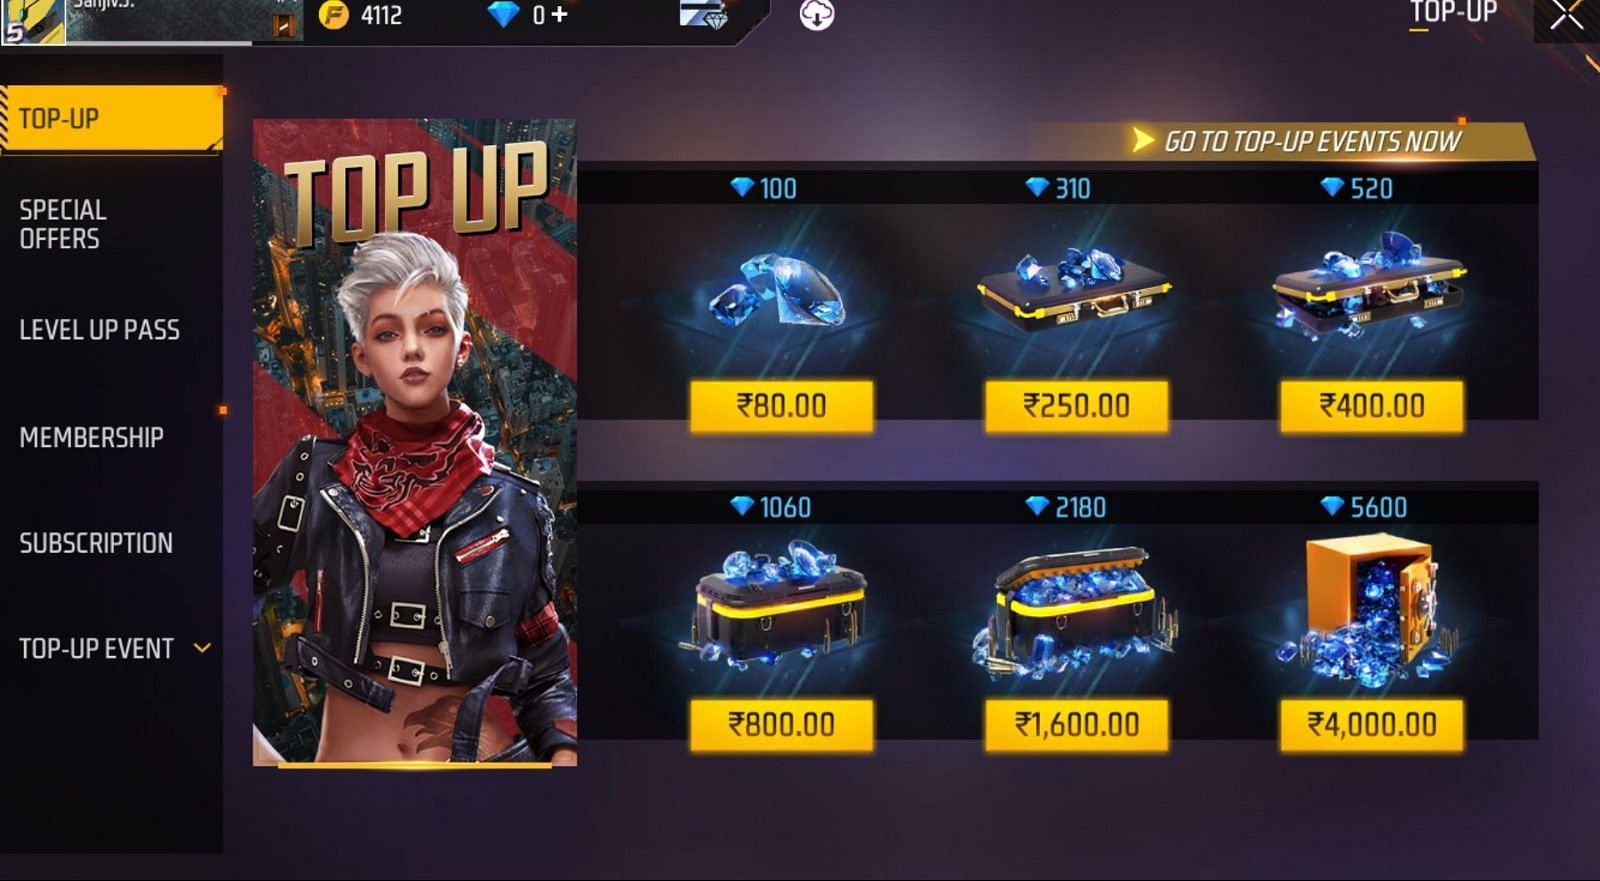 Users can do top up from this panel (Image via Garena)